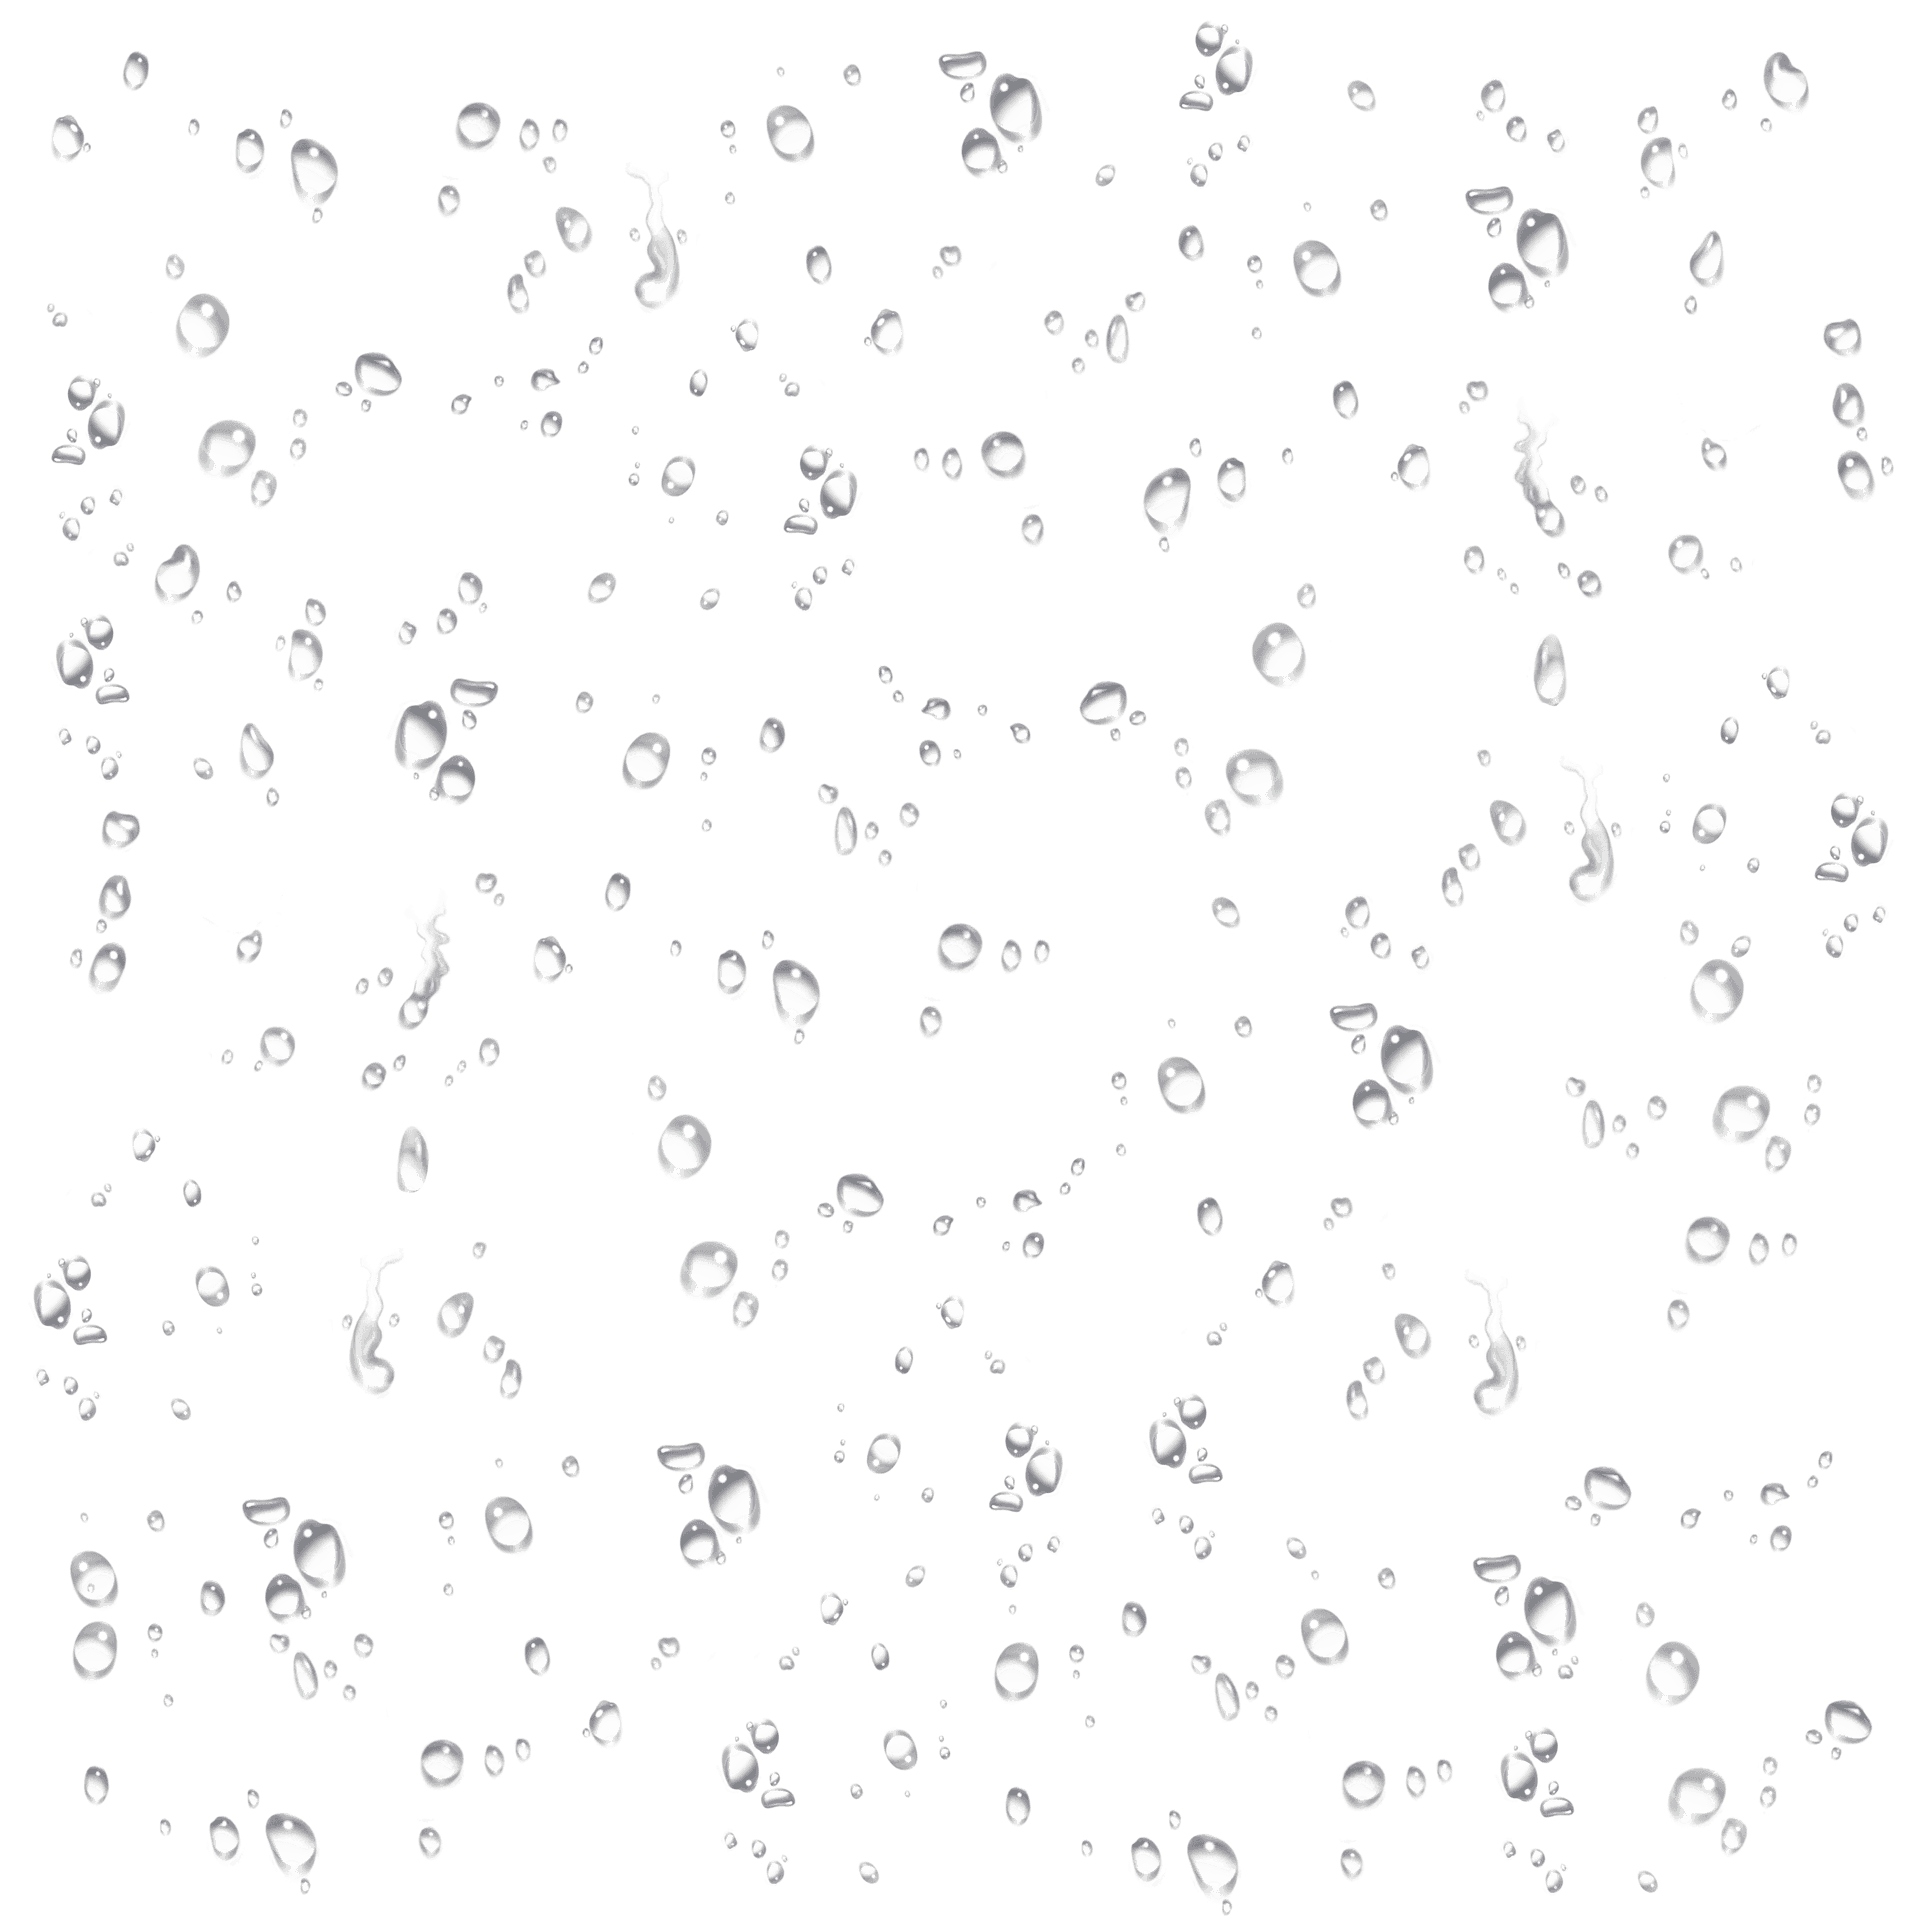 Raindropson Glass Texture PNG